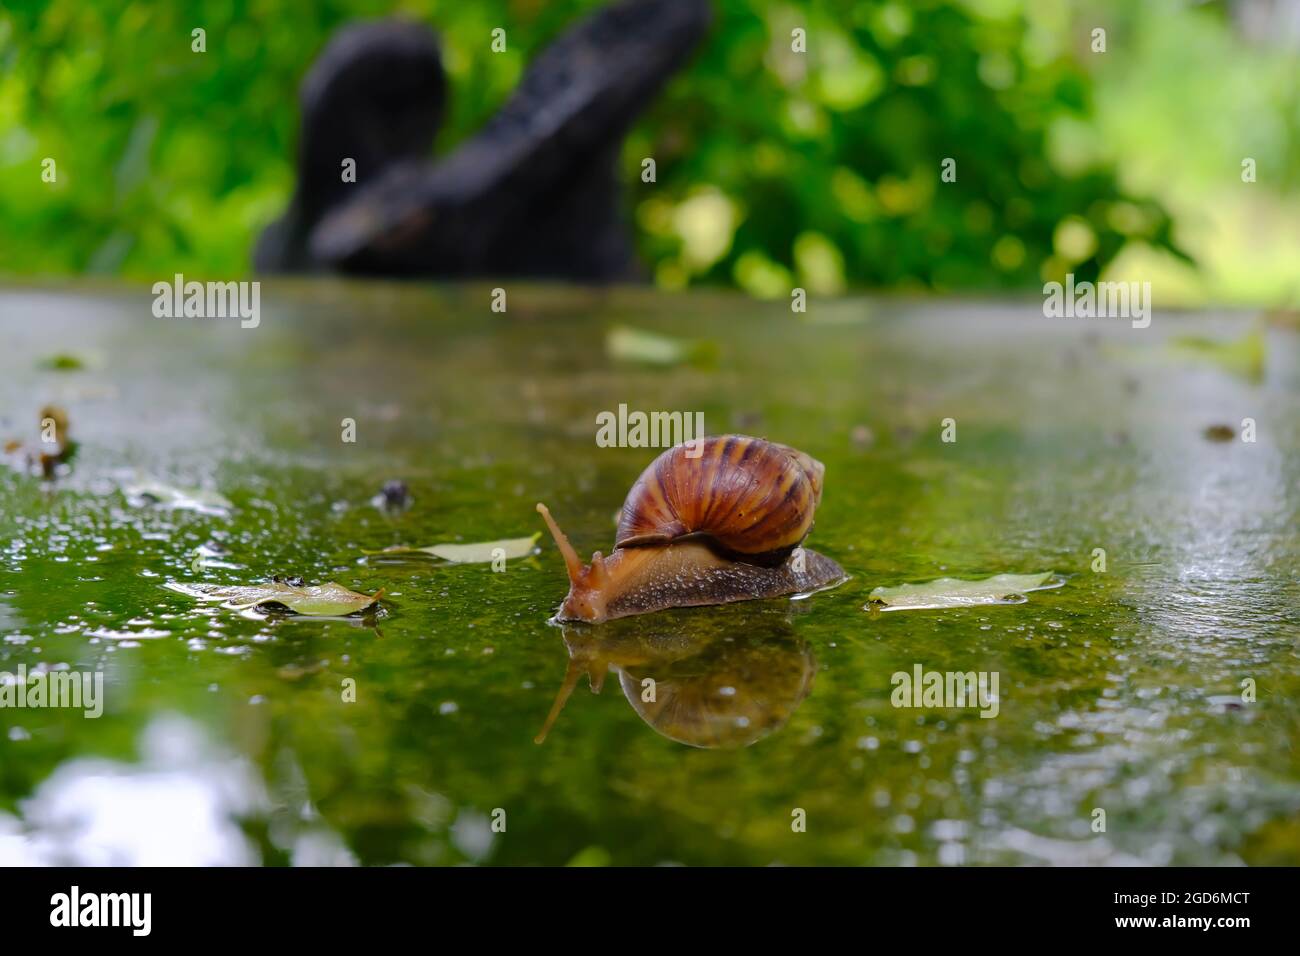 Big snail gliding on the wet floor in the summer garden. Large mollusk snails with light brown striped shell, crawling on moss. Stock Photo